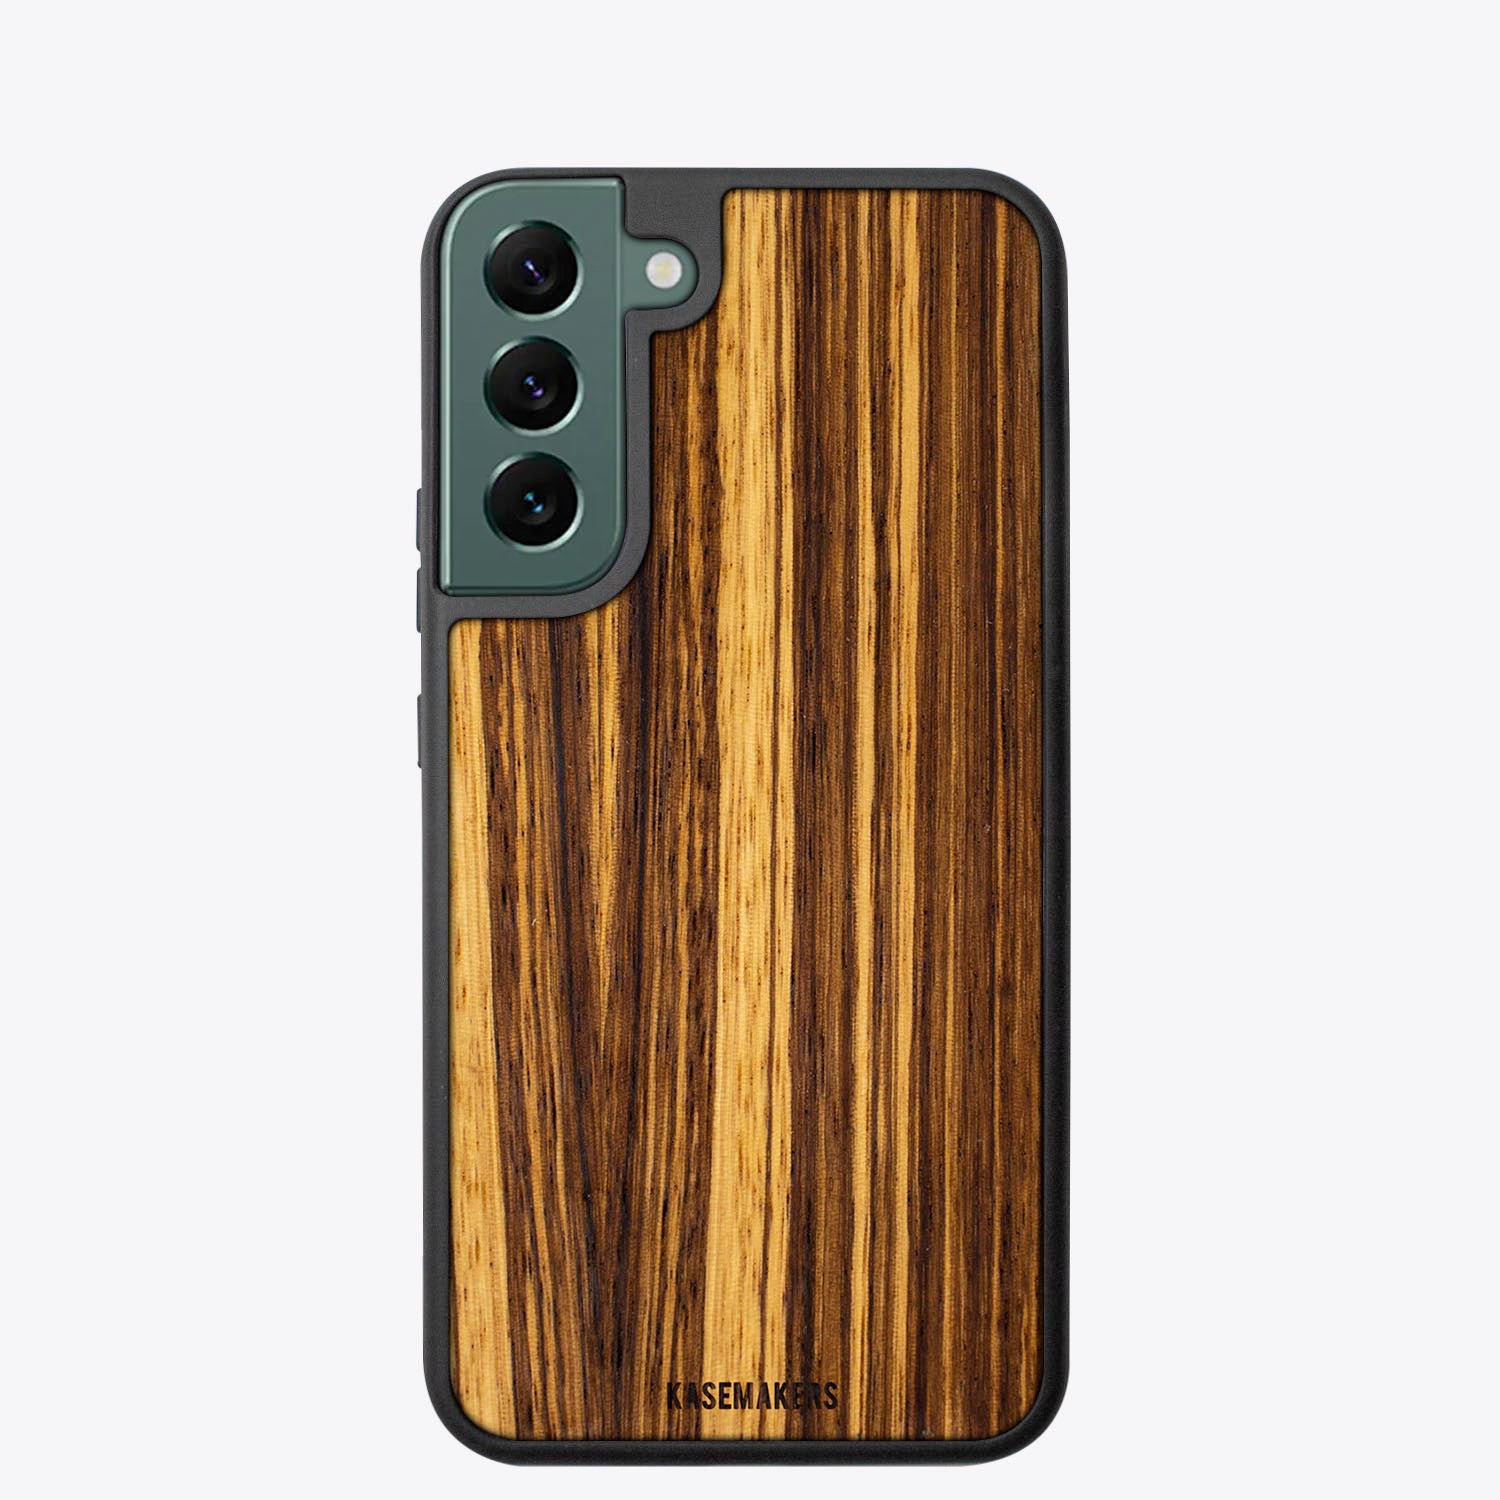 Zebrawood Kase for Samsung Galaxy S22 - Buy One Get One FREE!